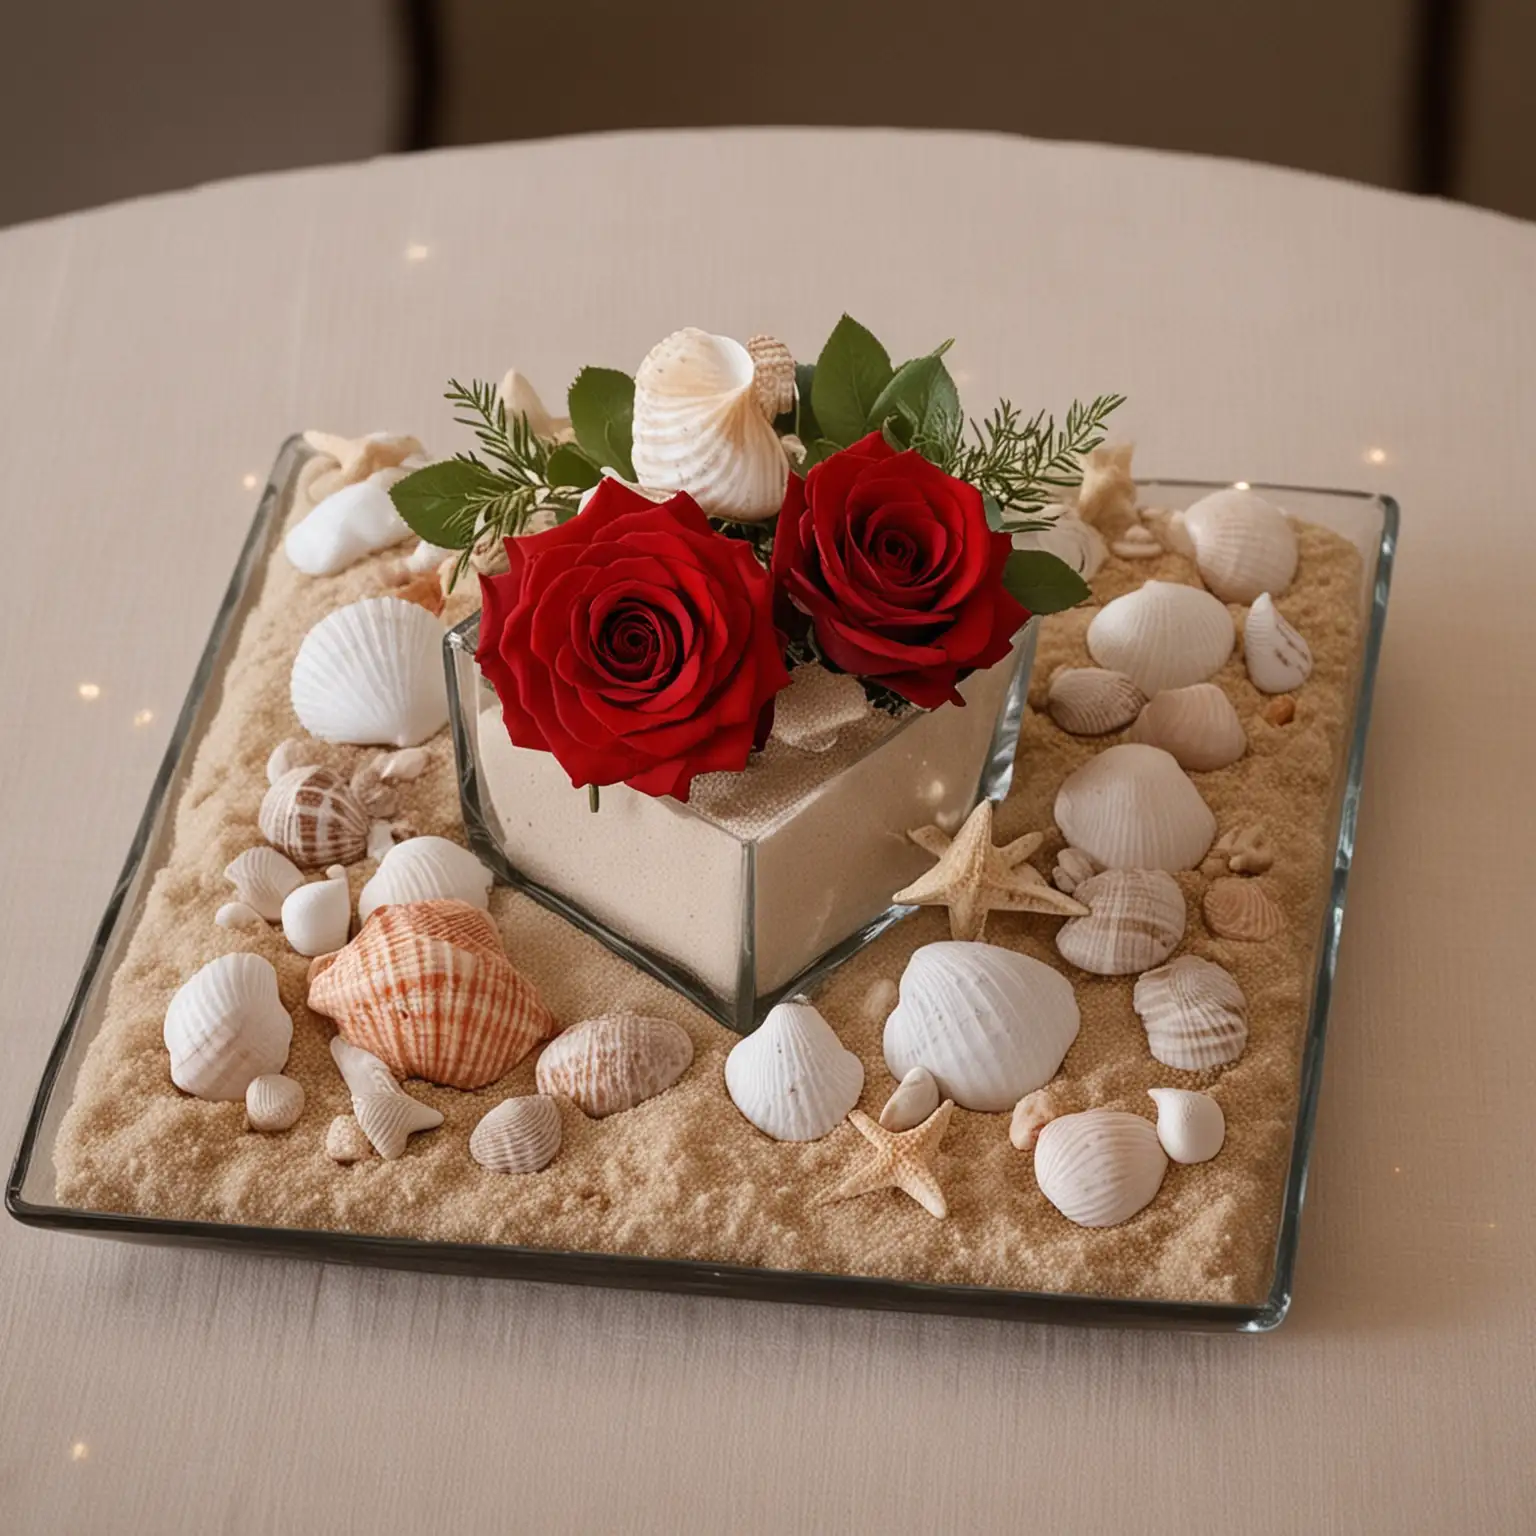 Wedding-Table-Centerpiece-Red-Rose-and-Sand-Seashell-Square-Vase-Decor